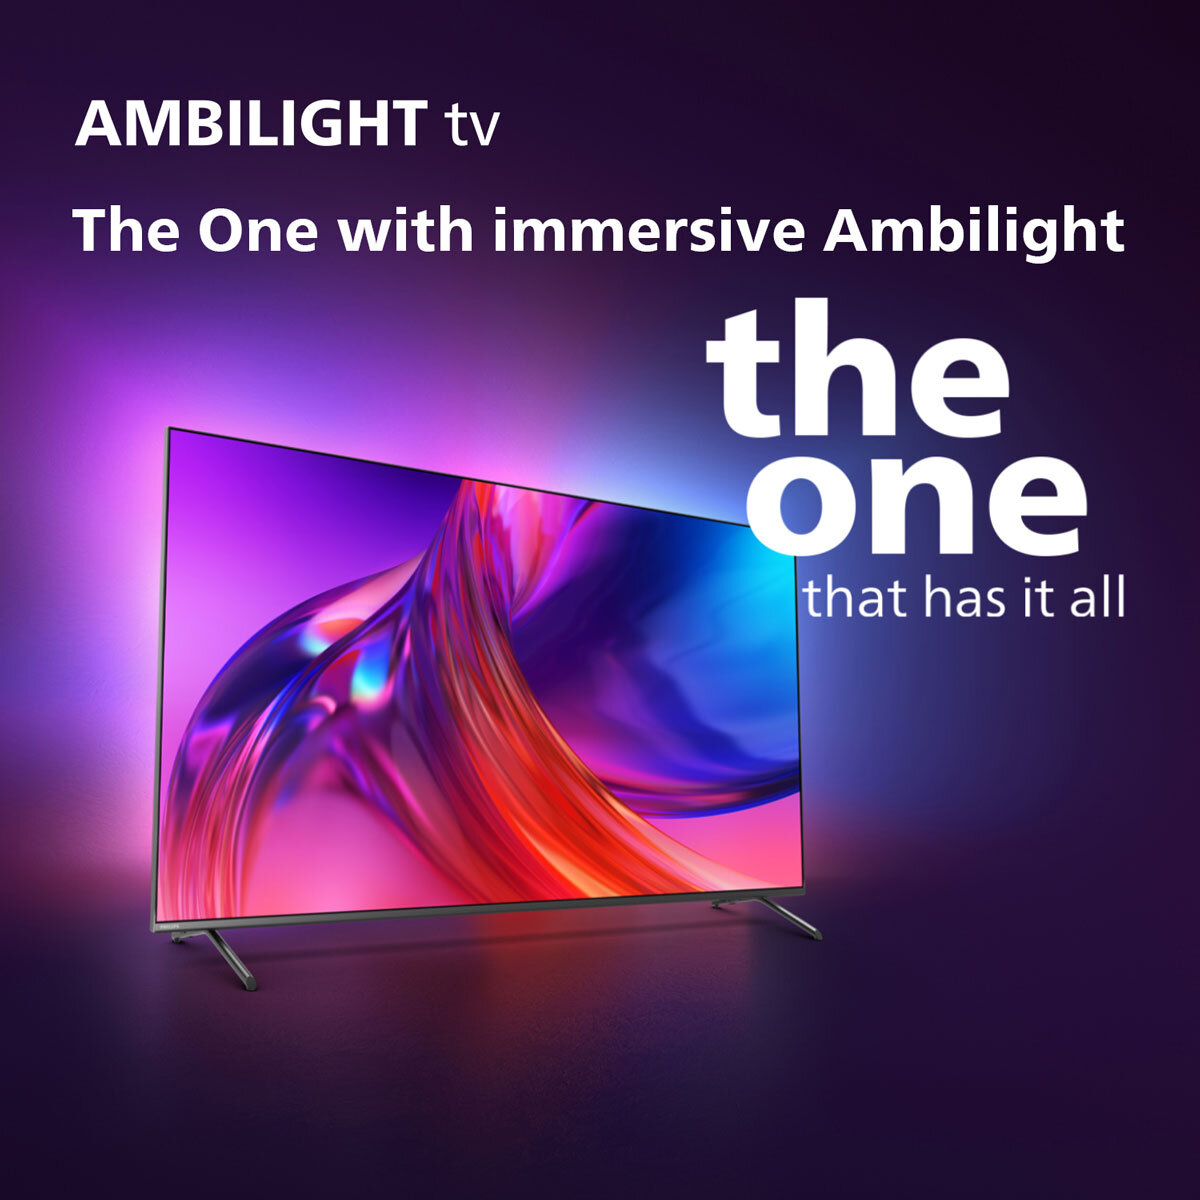 The One 4K Ambilight TV 65PUS8808/12